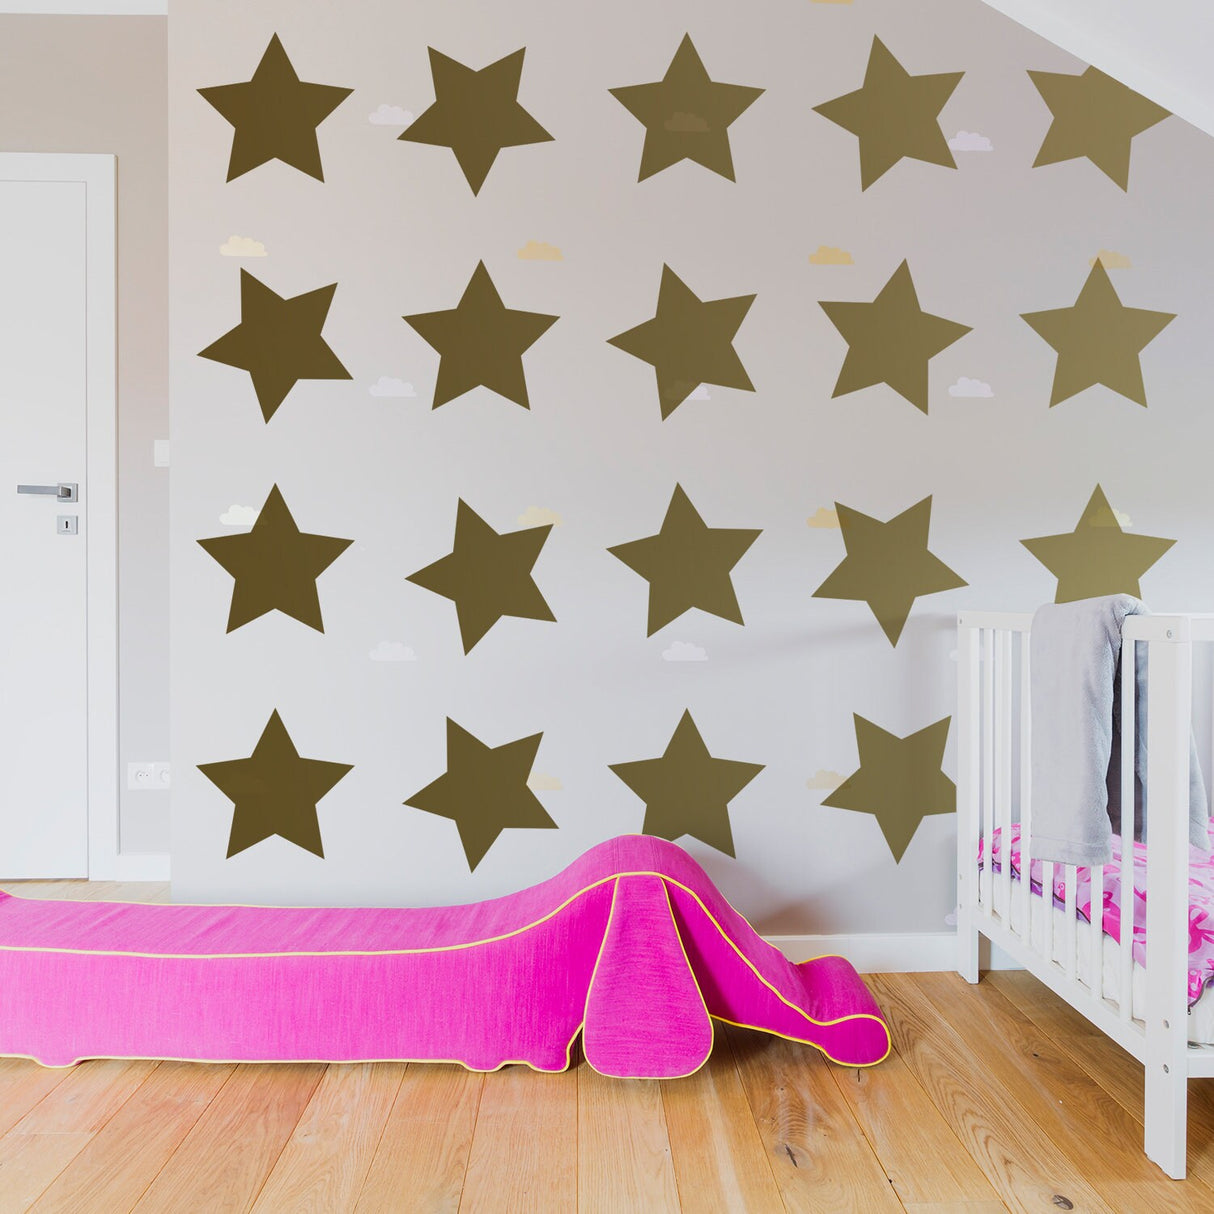 40x Star Stickers - Baby Shower Decor Set Vinyl Wall Twinkle Decal